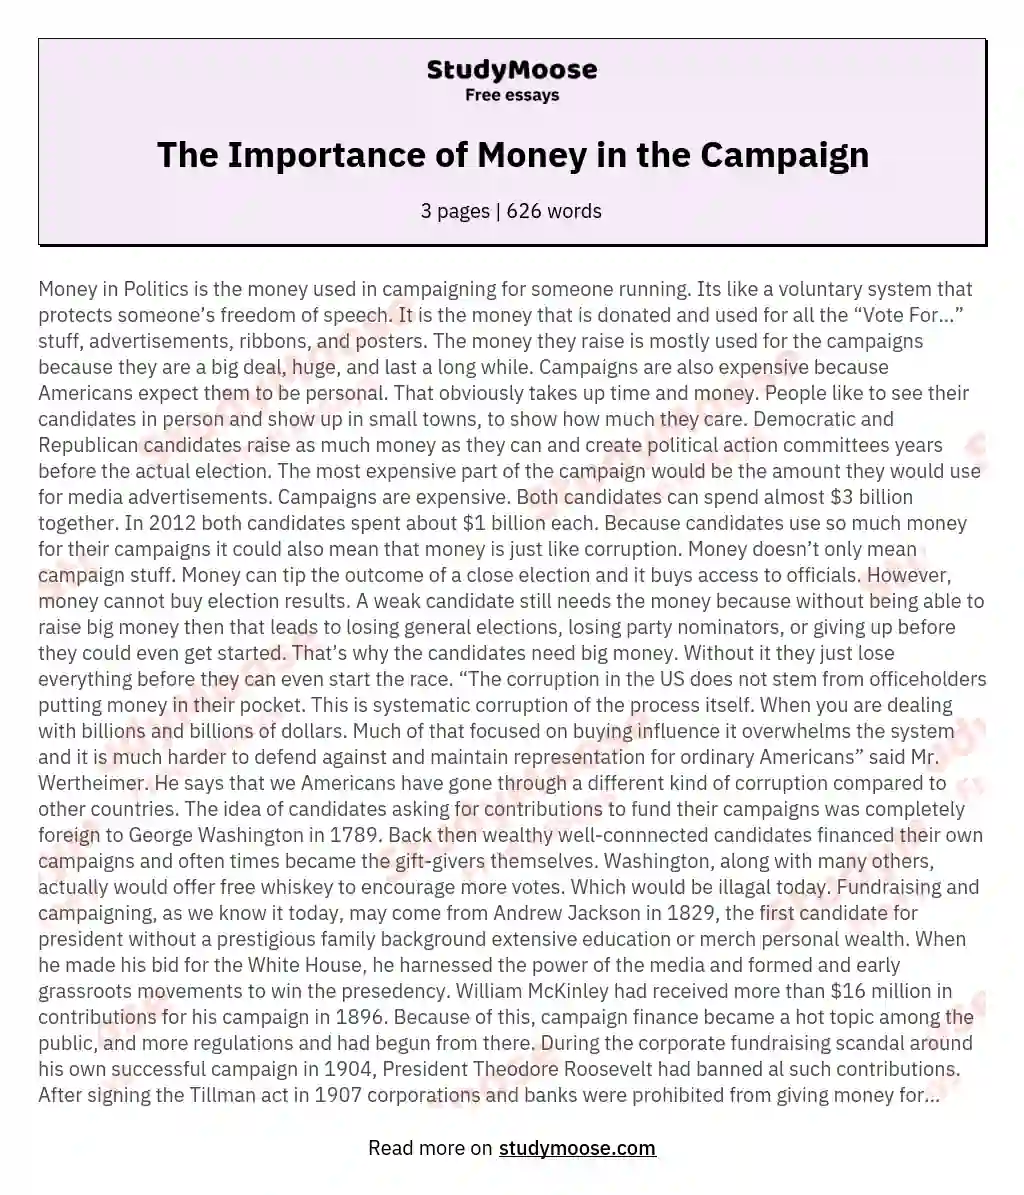 The Importance of Money in the Campaign essay